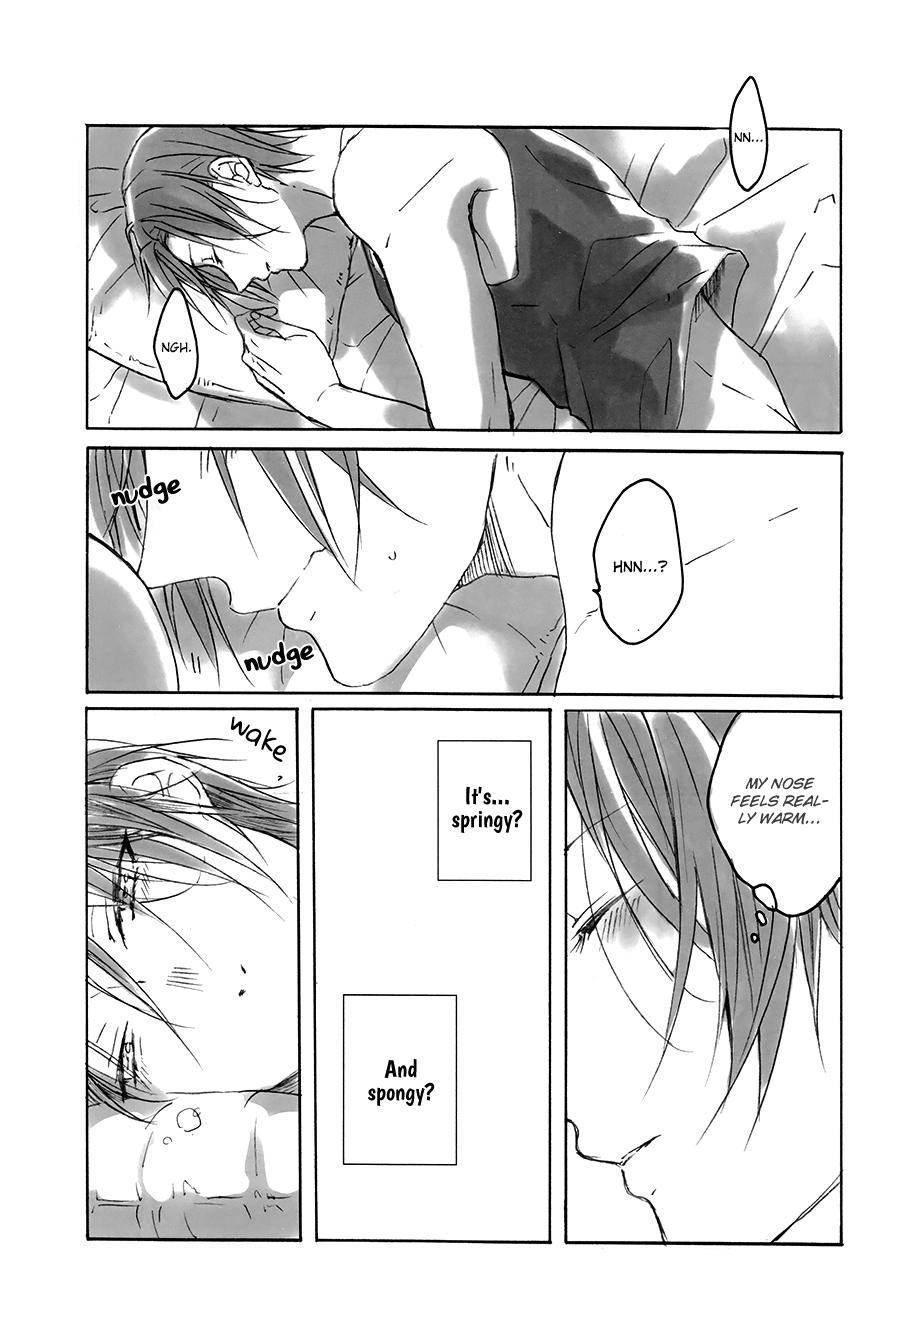 Gay Blondhair Can Haruka Have Sex with Rin After Suddenly Turning Into an Odd Little Lifeform? - Free Panty - Page 2